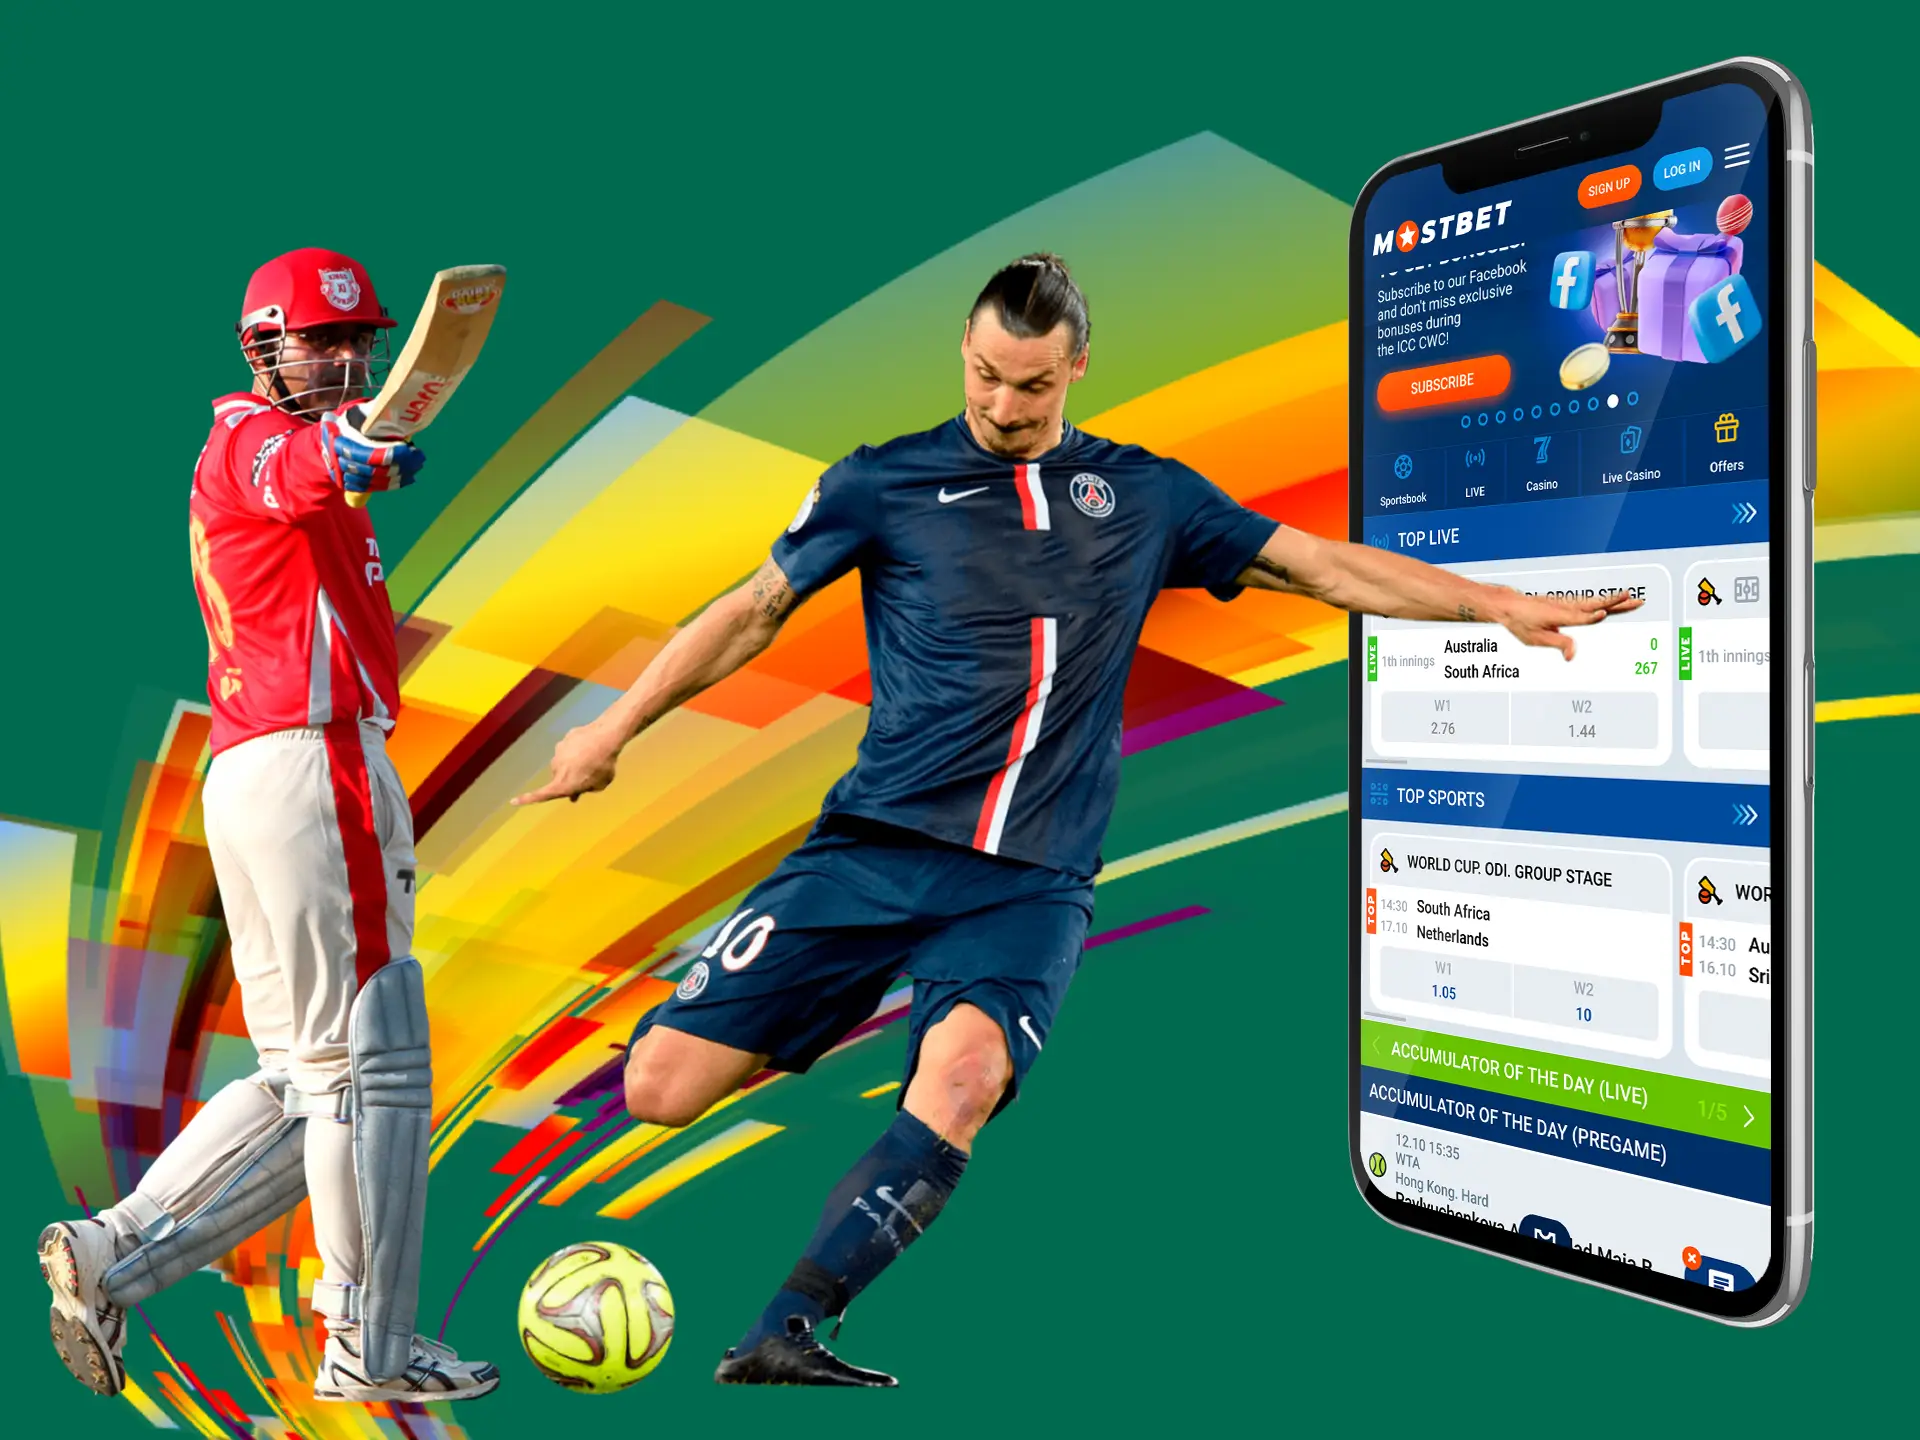 Different markets, huge odds will help players win real money at Mostbet.